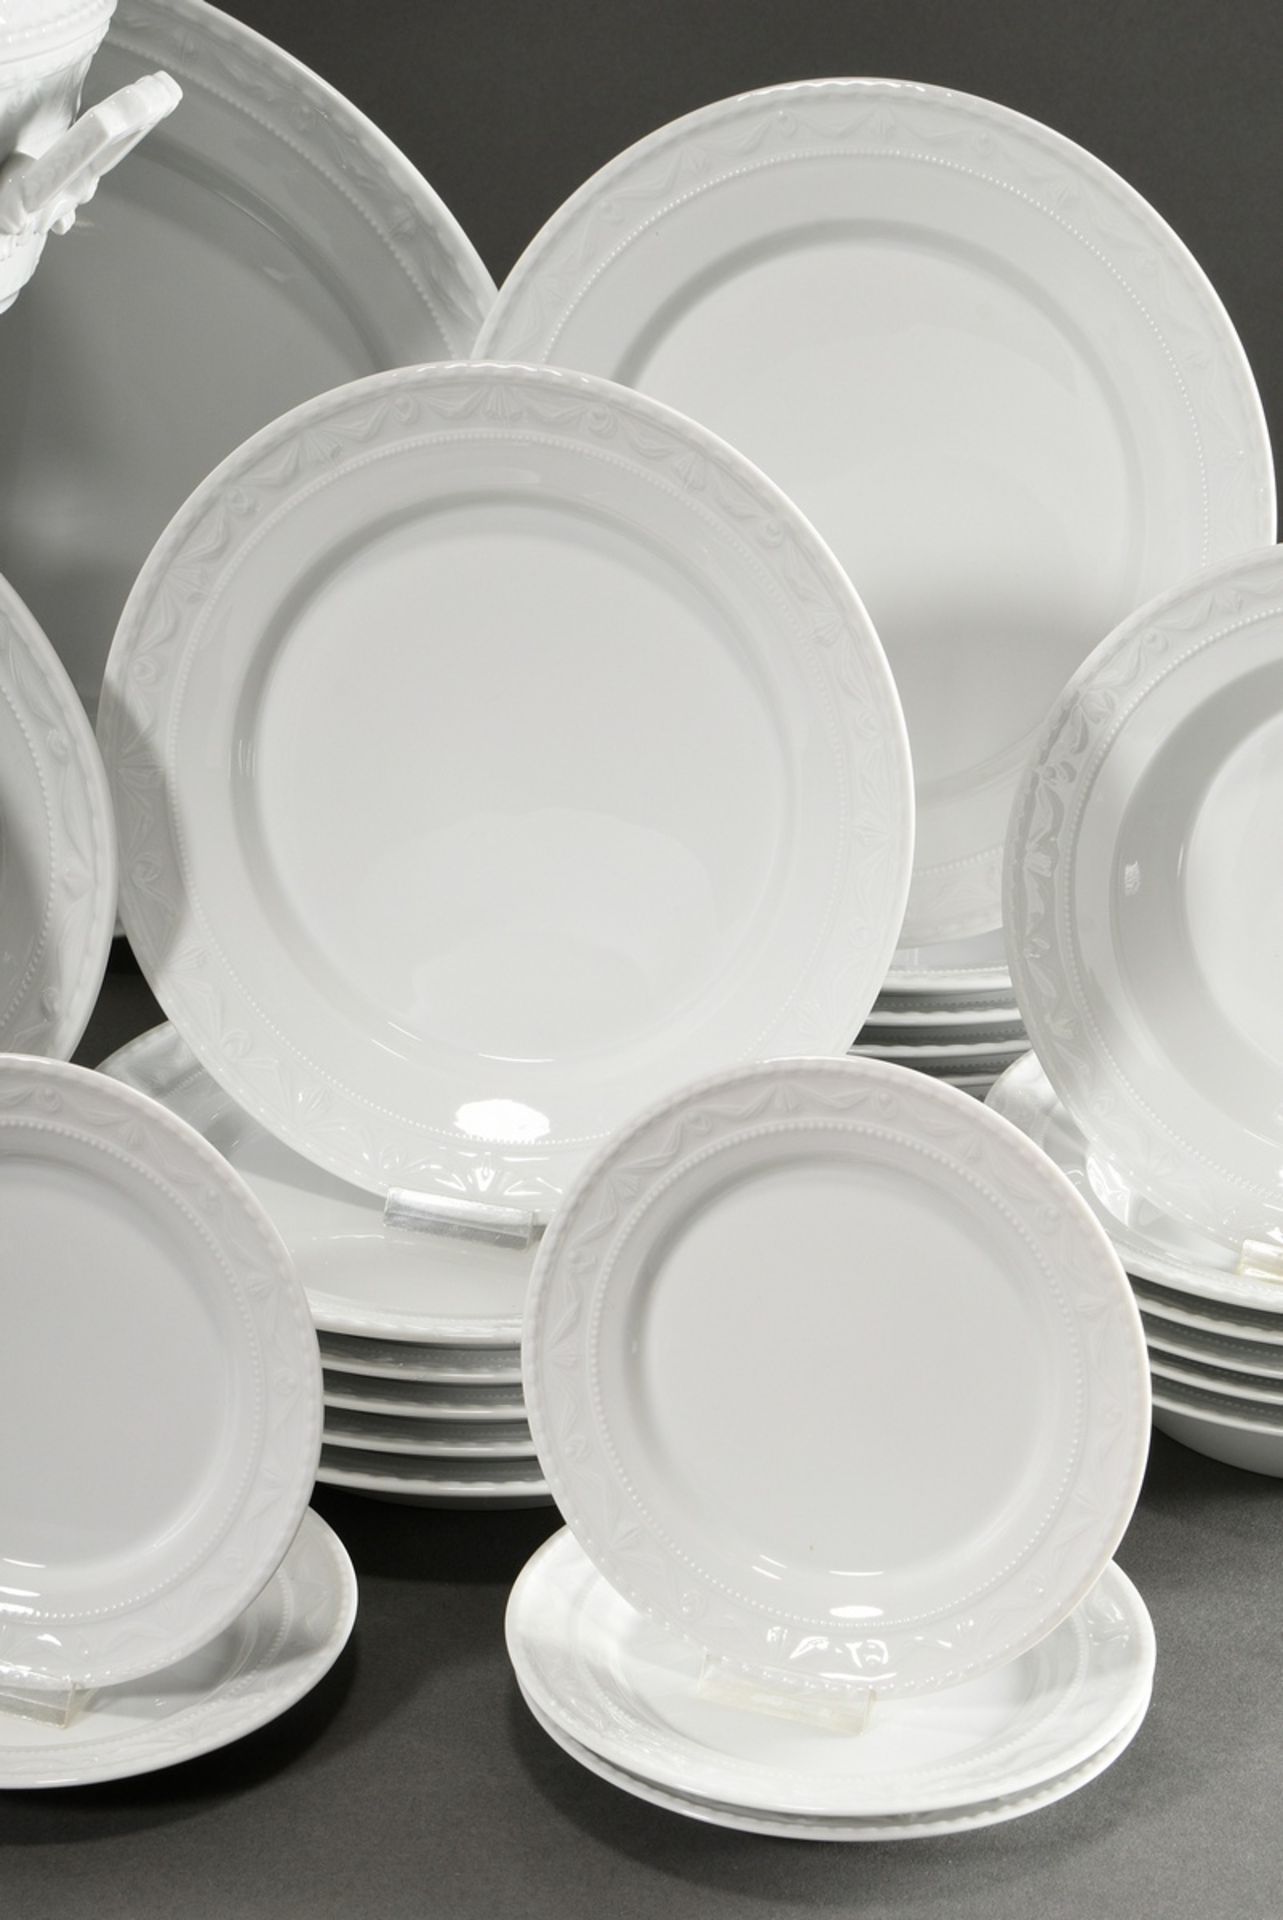 53 Pieces KPM dinner service "Kurland white" with relief border, consisting of: 14 dinner plates (Ø - Image 3 of 6